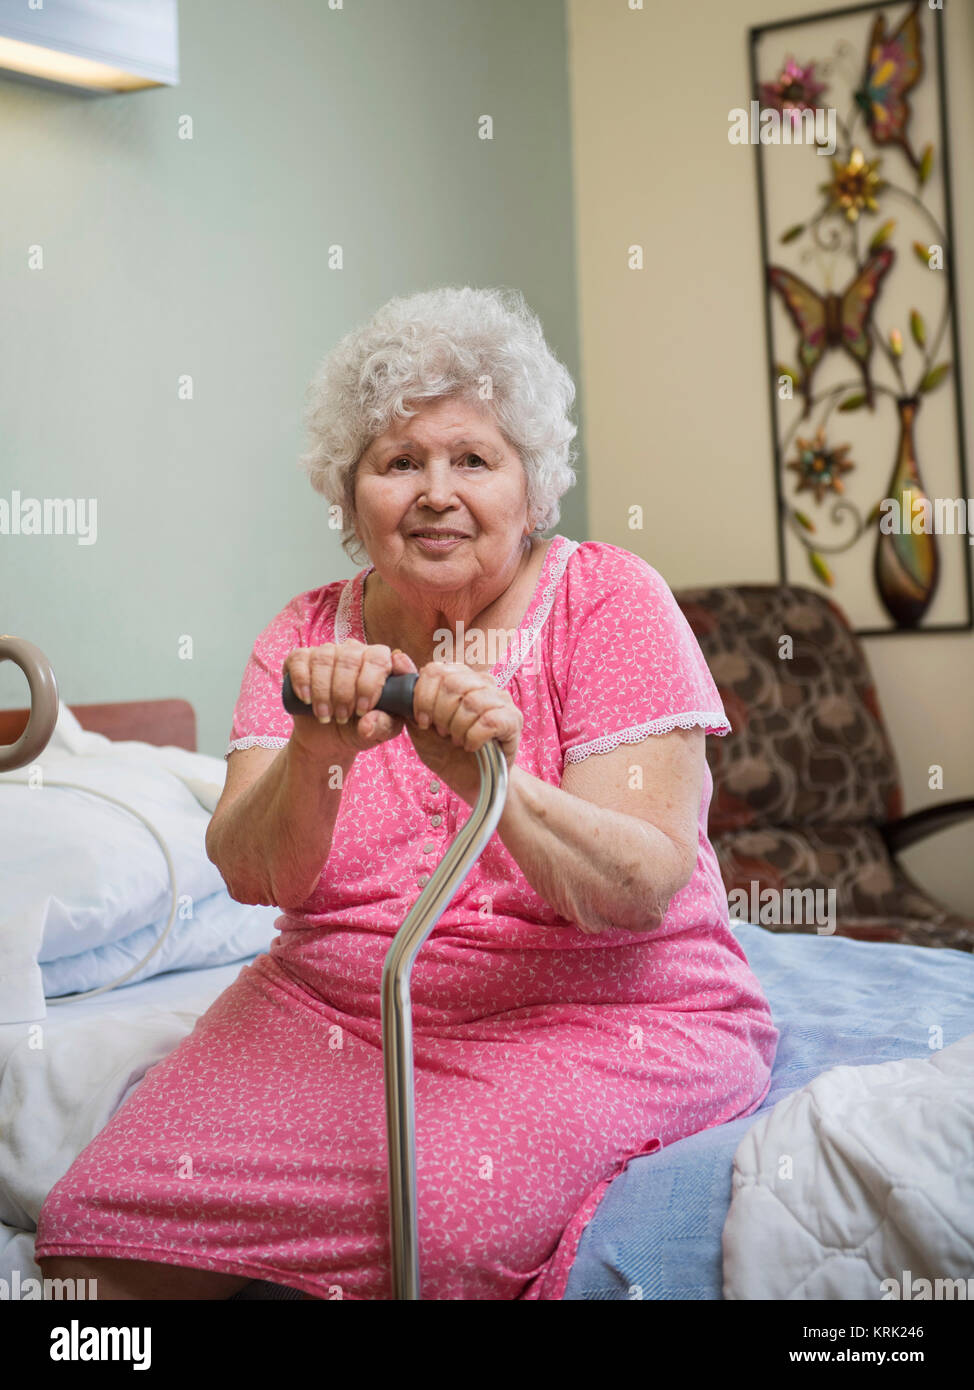 Smiling Caucasian woman sitting on bed leaning on cane Stock Photo